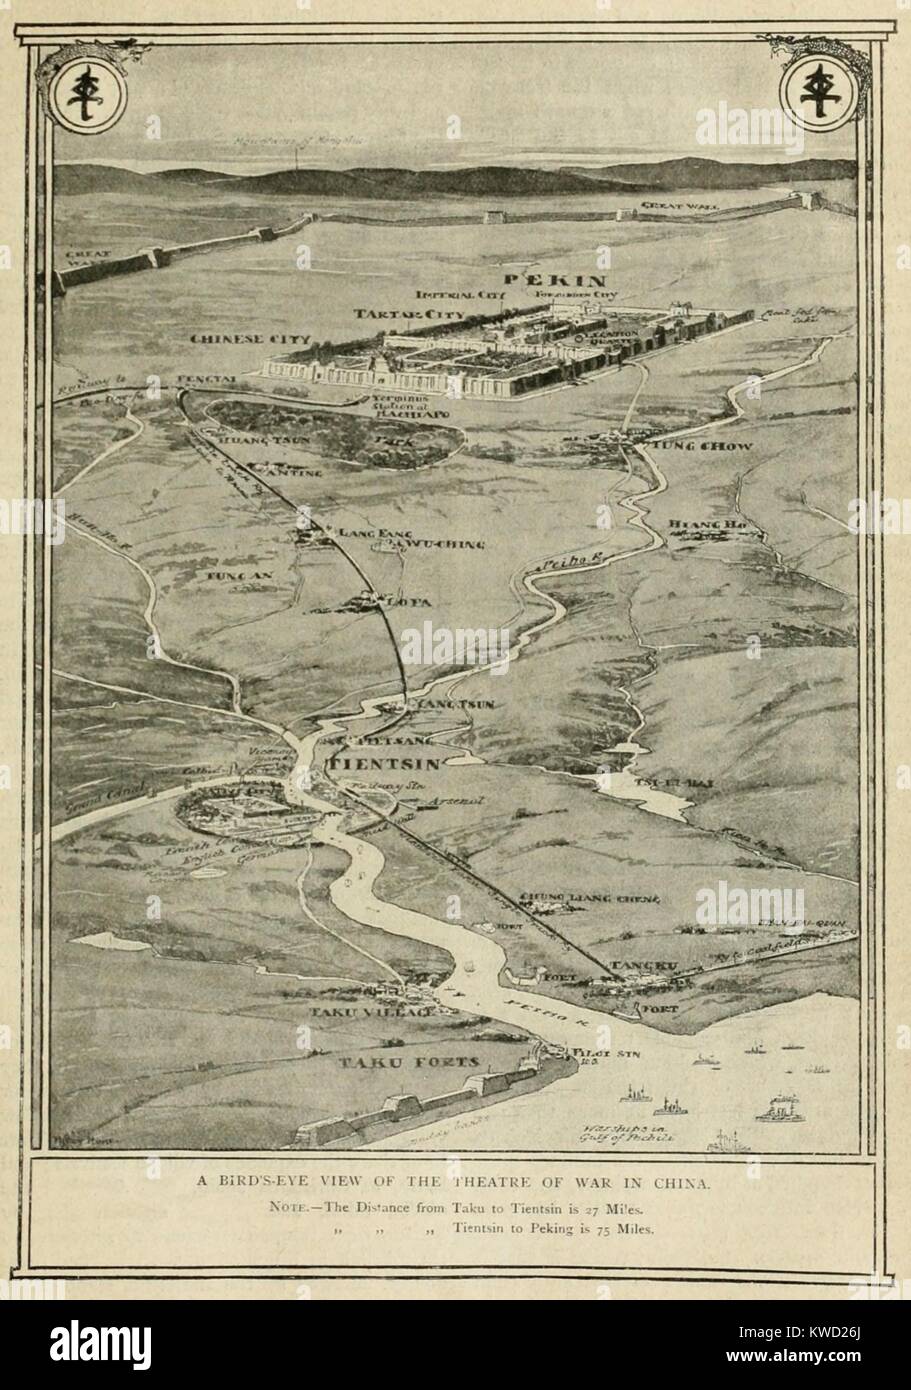 Birds eye view of the theater of war in China during the Boxer Rebellion of 1900. Key points are the City of Beijing (Peking), 102 miles inland; the city of Tainjin (Tientsin) where Boxers and the Chinese Army attacked foreigners; Langfang, where Admiral Seymours advance to Beijing was blocked, and the Dagu (Taku) Forts guarding entry to the interior. The 1963 movie, 55 DAYS AT PEKING, was based on the war  (BSLOC_2017_20_18) Stock Photo